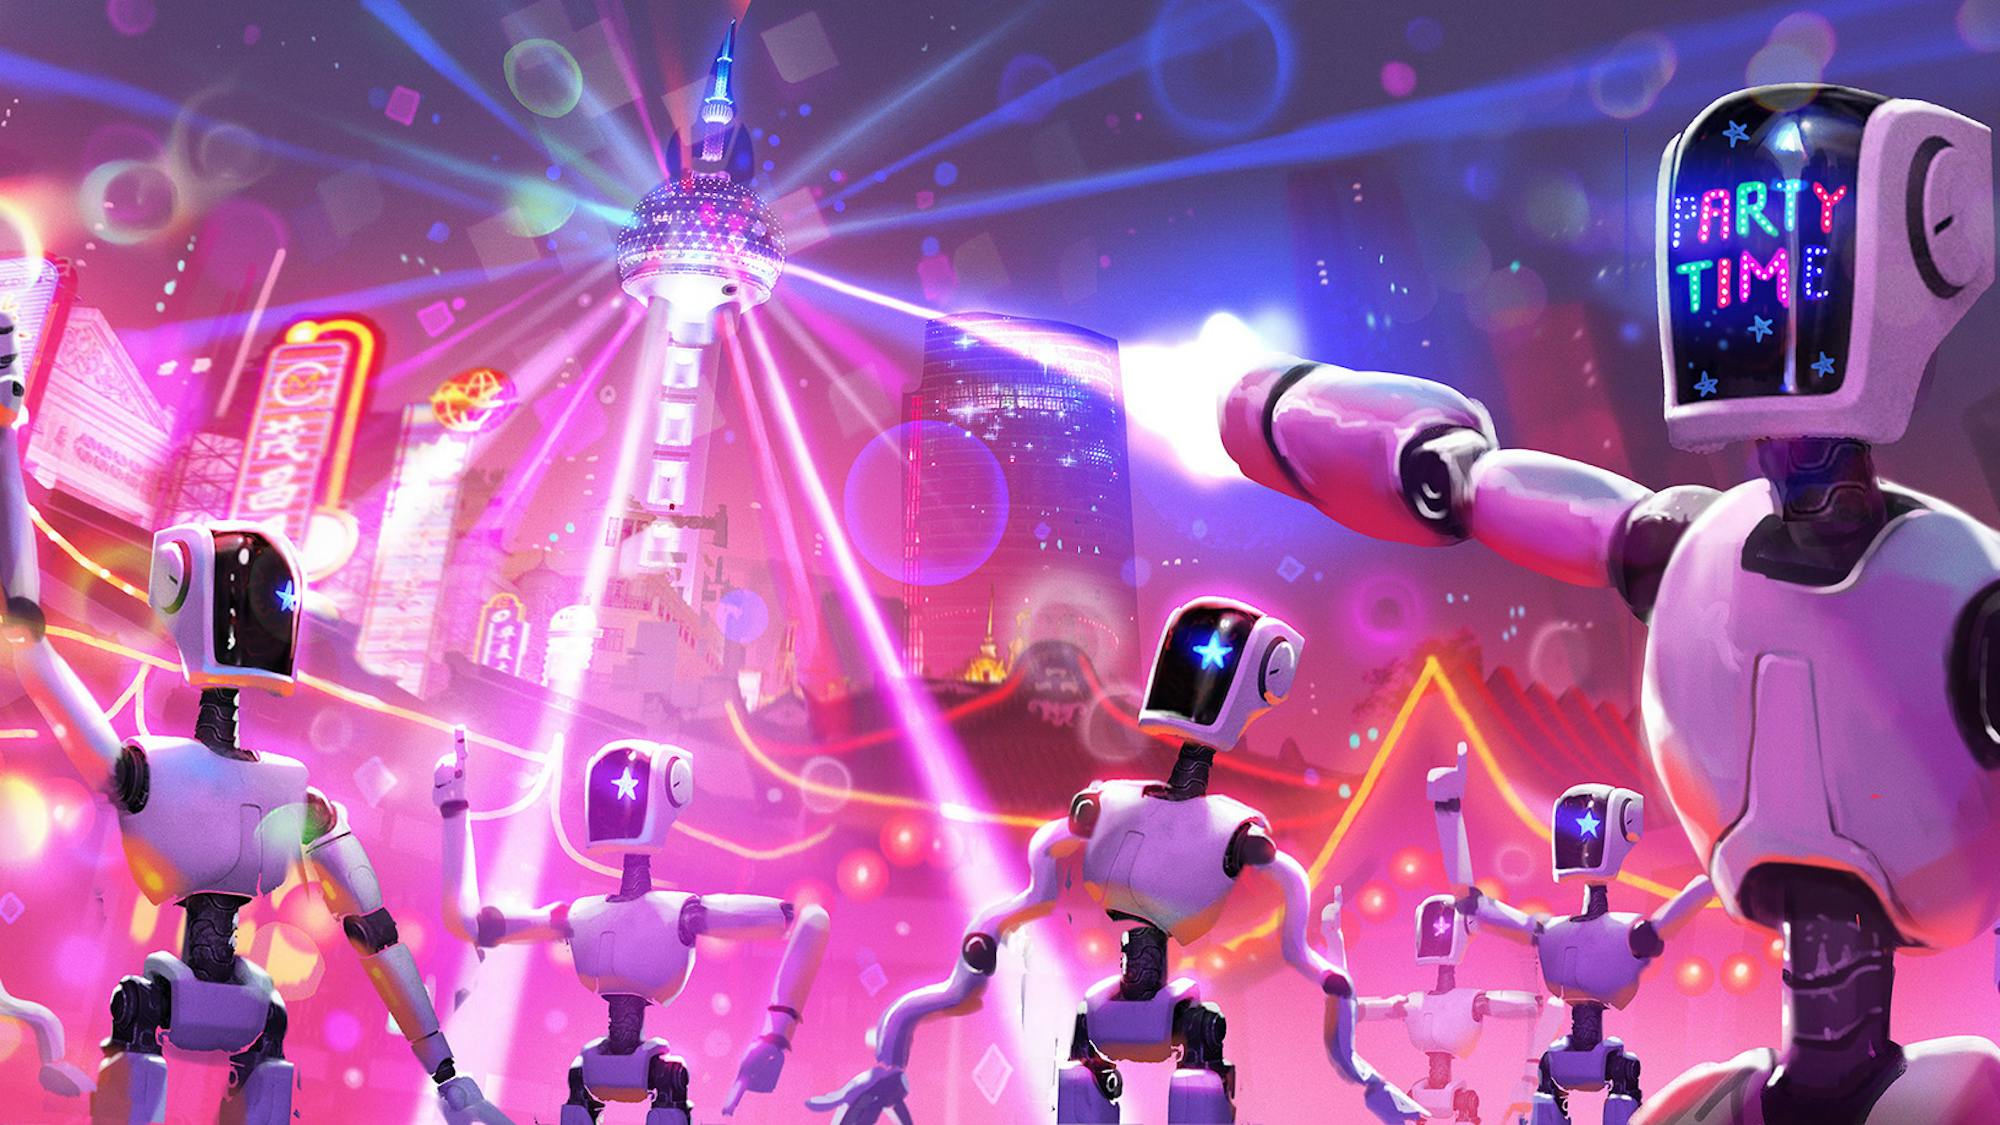 A robot dance party. A bunch of white robots with black faces dance around lit by pink, orange, blue, and white lights. The robot closest's face reads "Party Time."